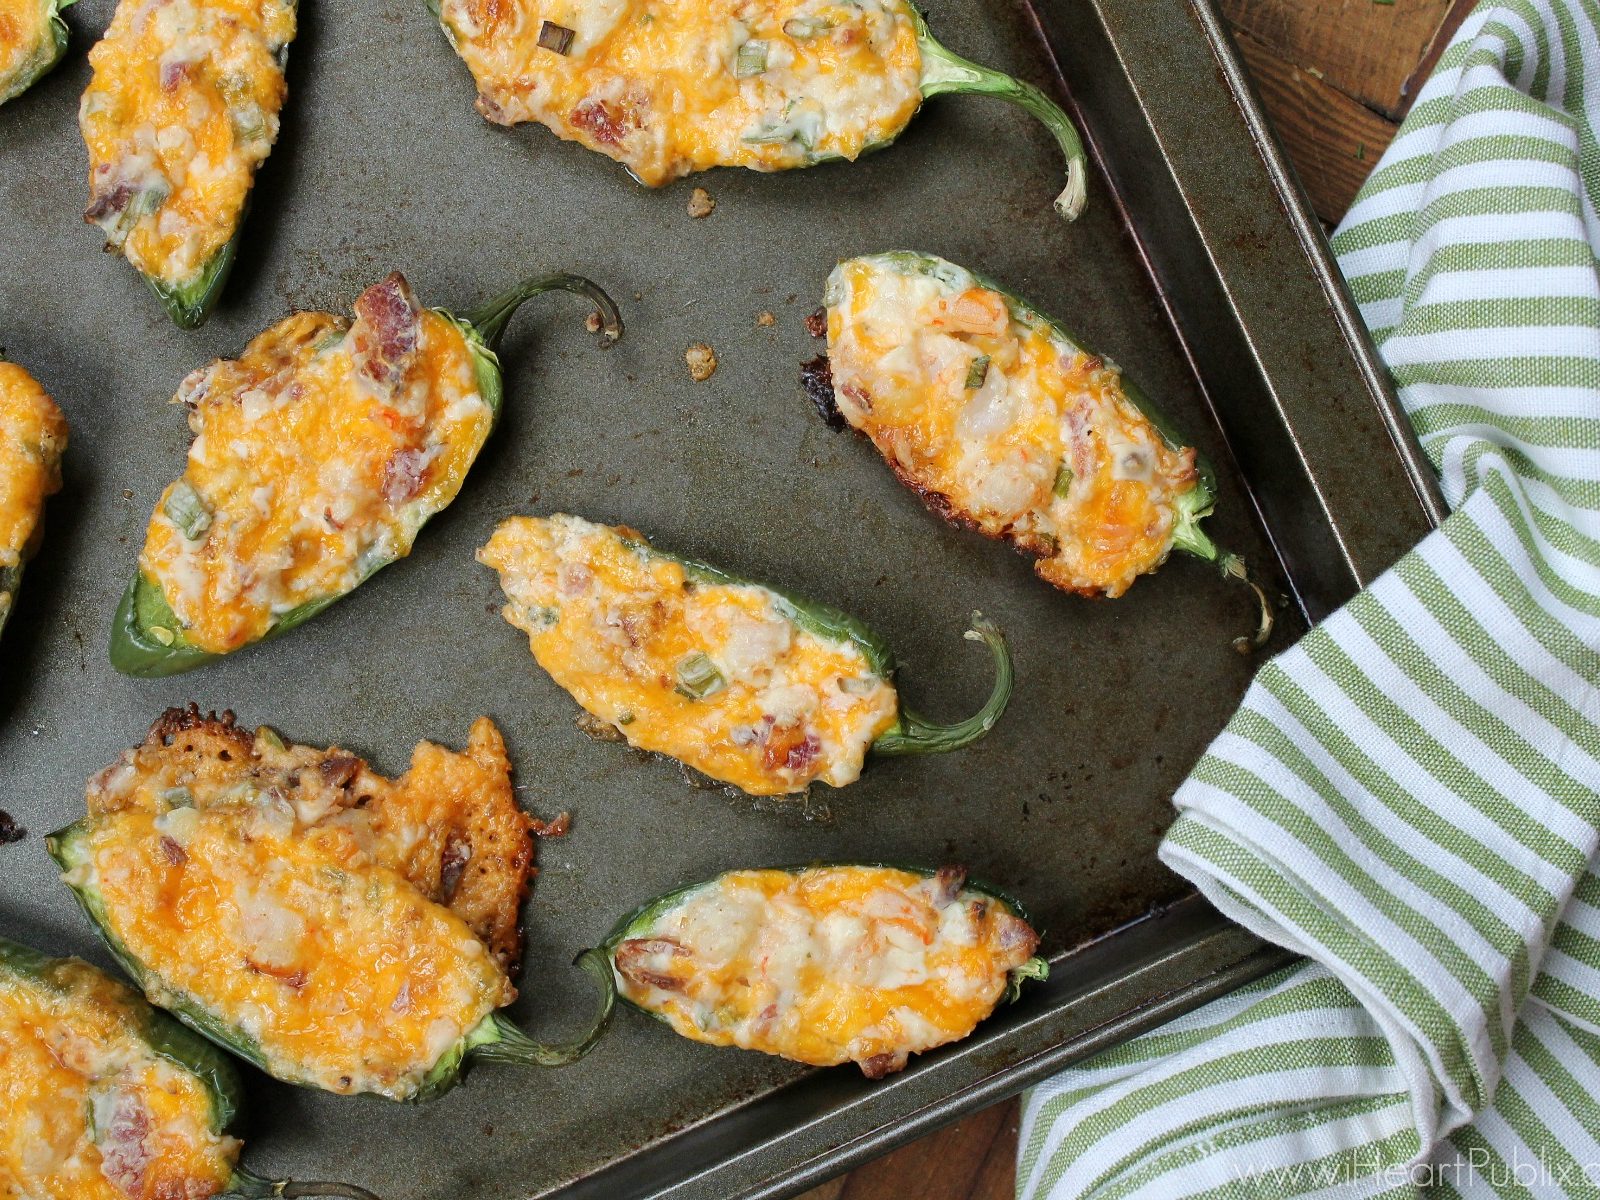 Bacon, Ranch & Shrimp Stuffed Jalapeños - Pick Up Big Savings On Arla Cream Cheese For This Recipe With The New Coupon! on I Heart Publix 1